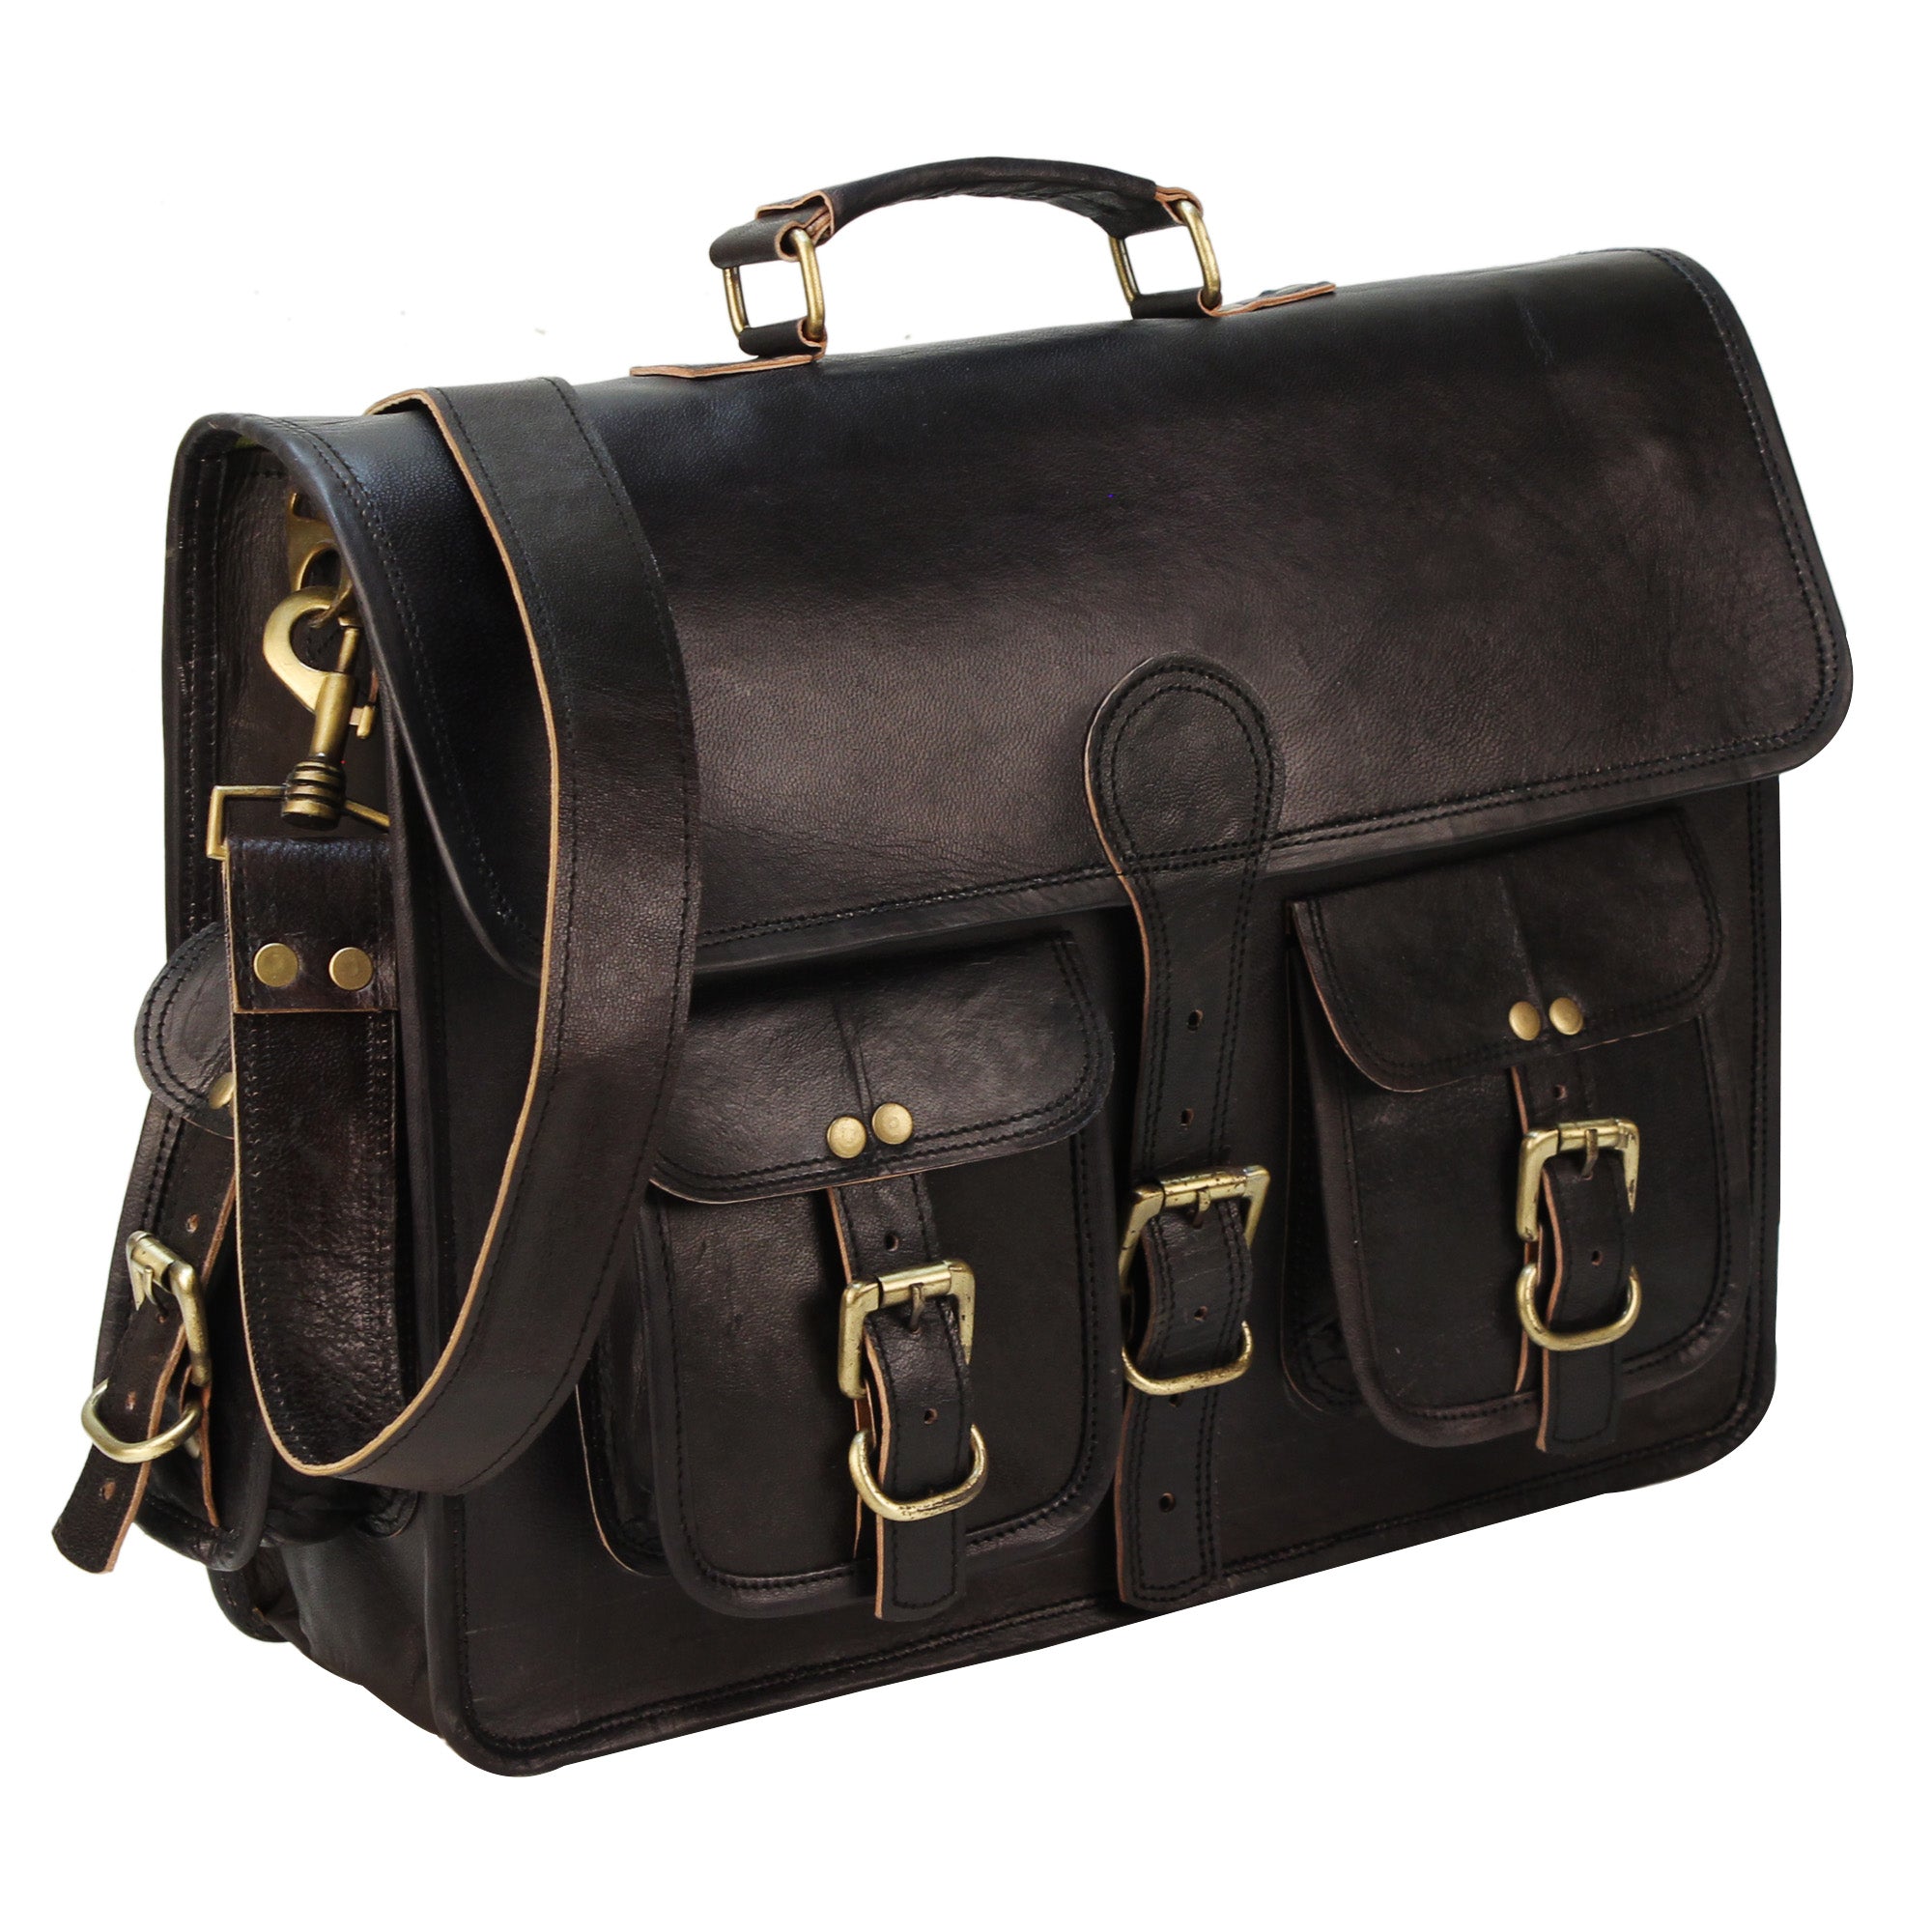 Black Leather Messenger Bag with Brass Buckle